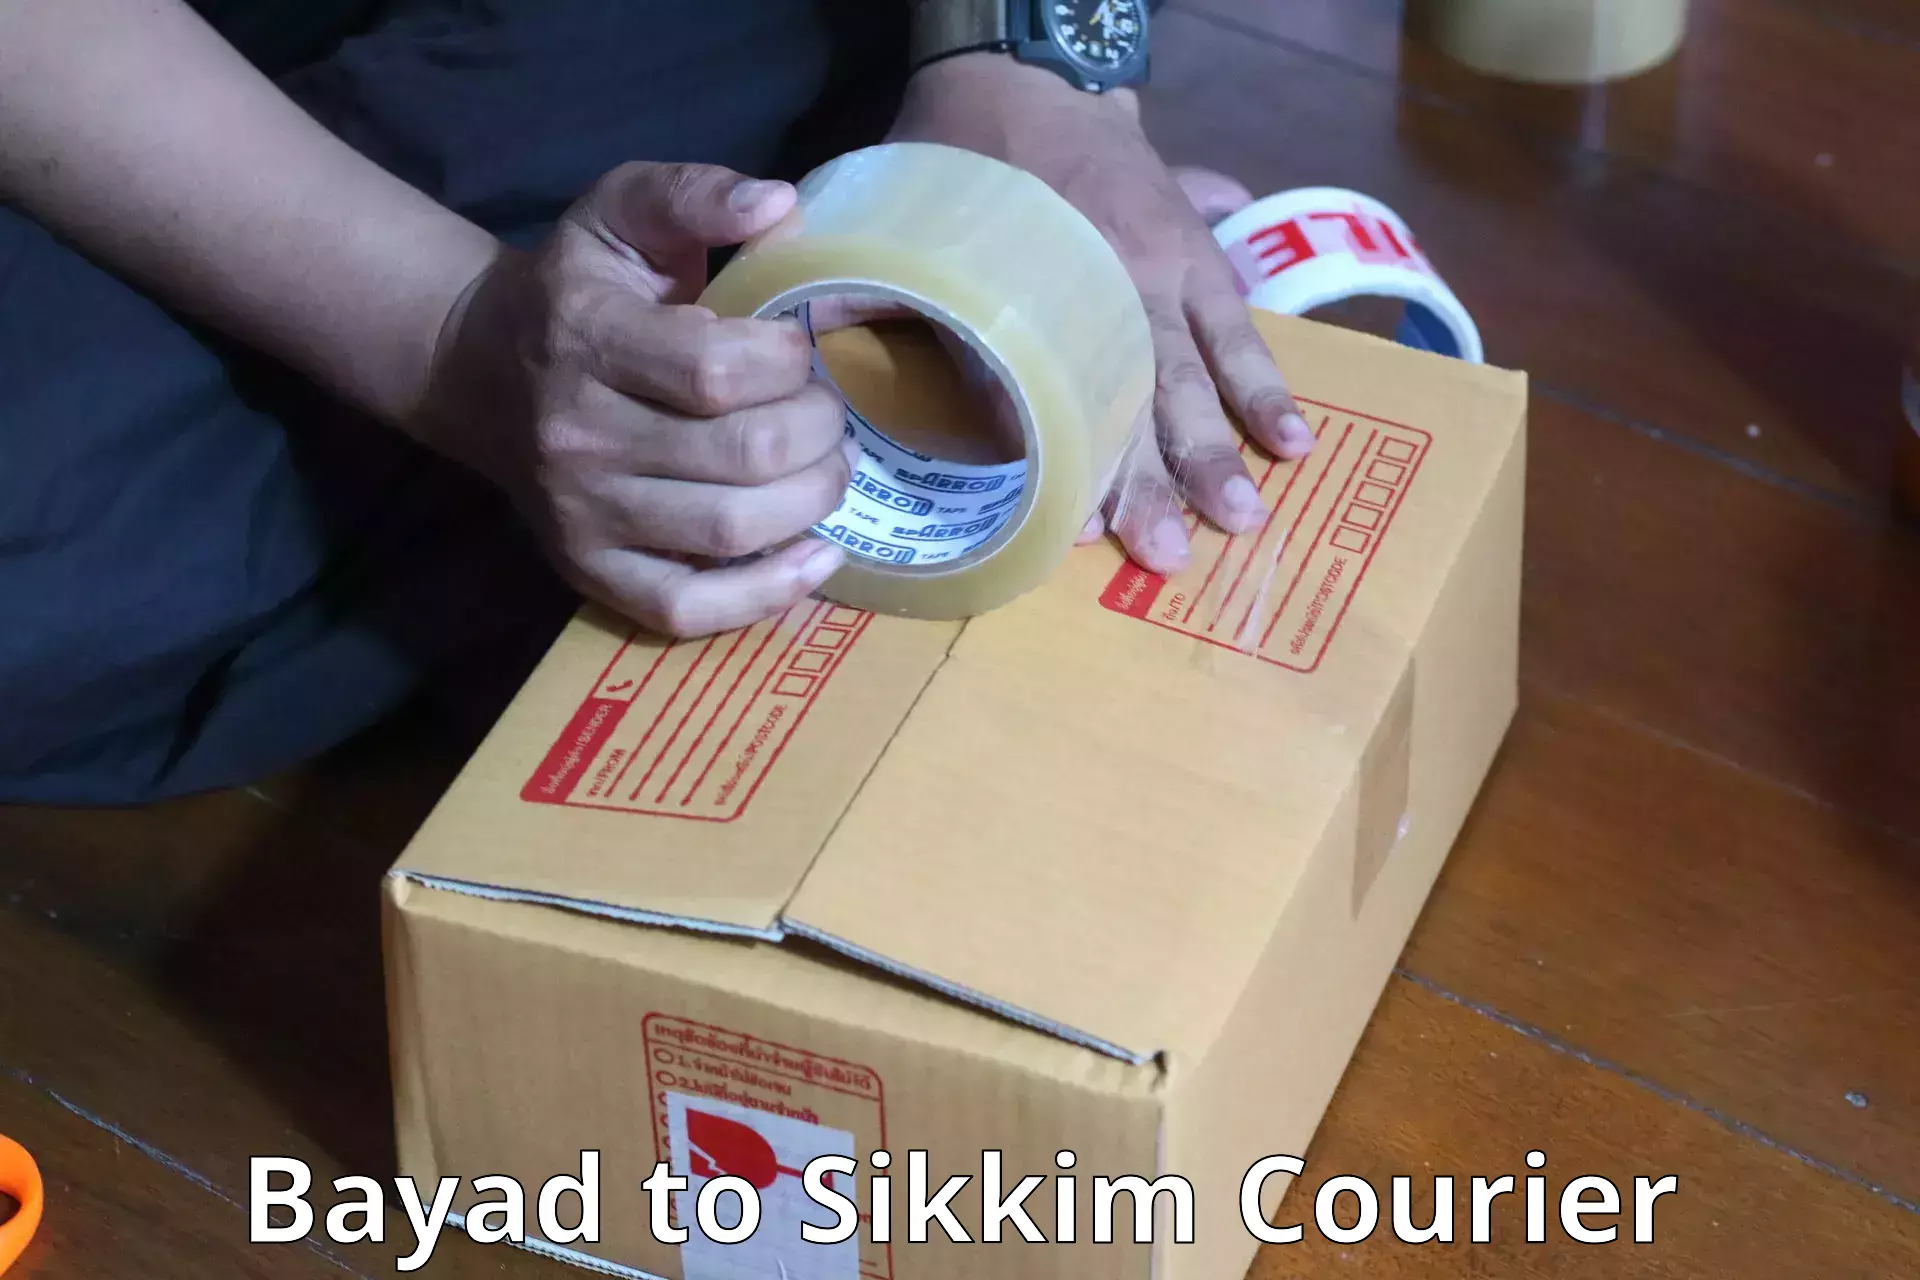 Baggage transport professionals Bayad to Sikkim